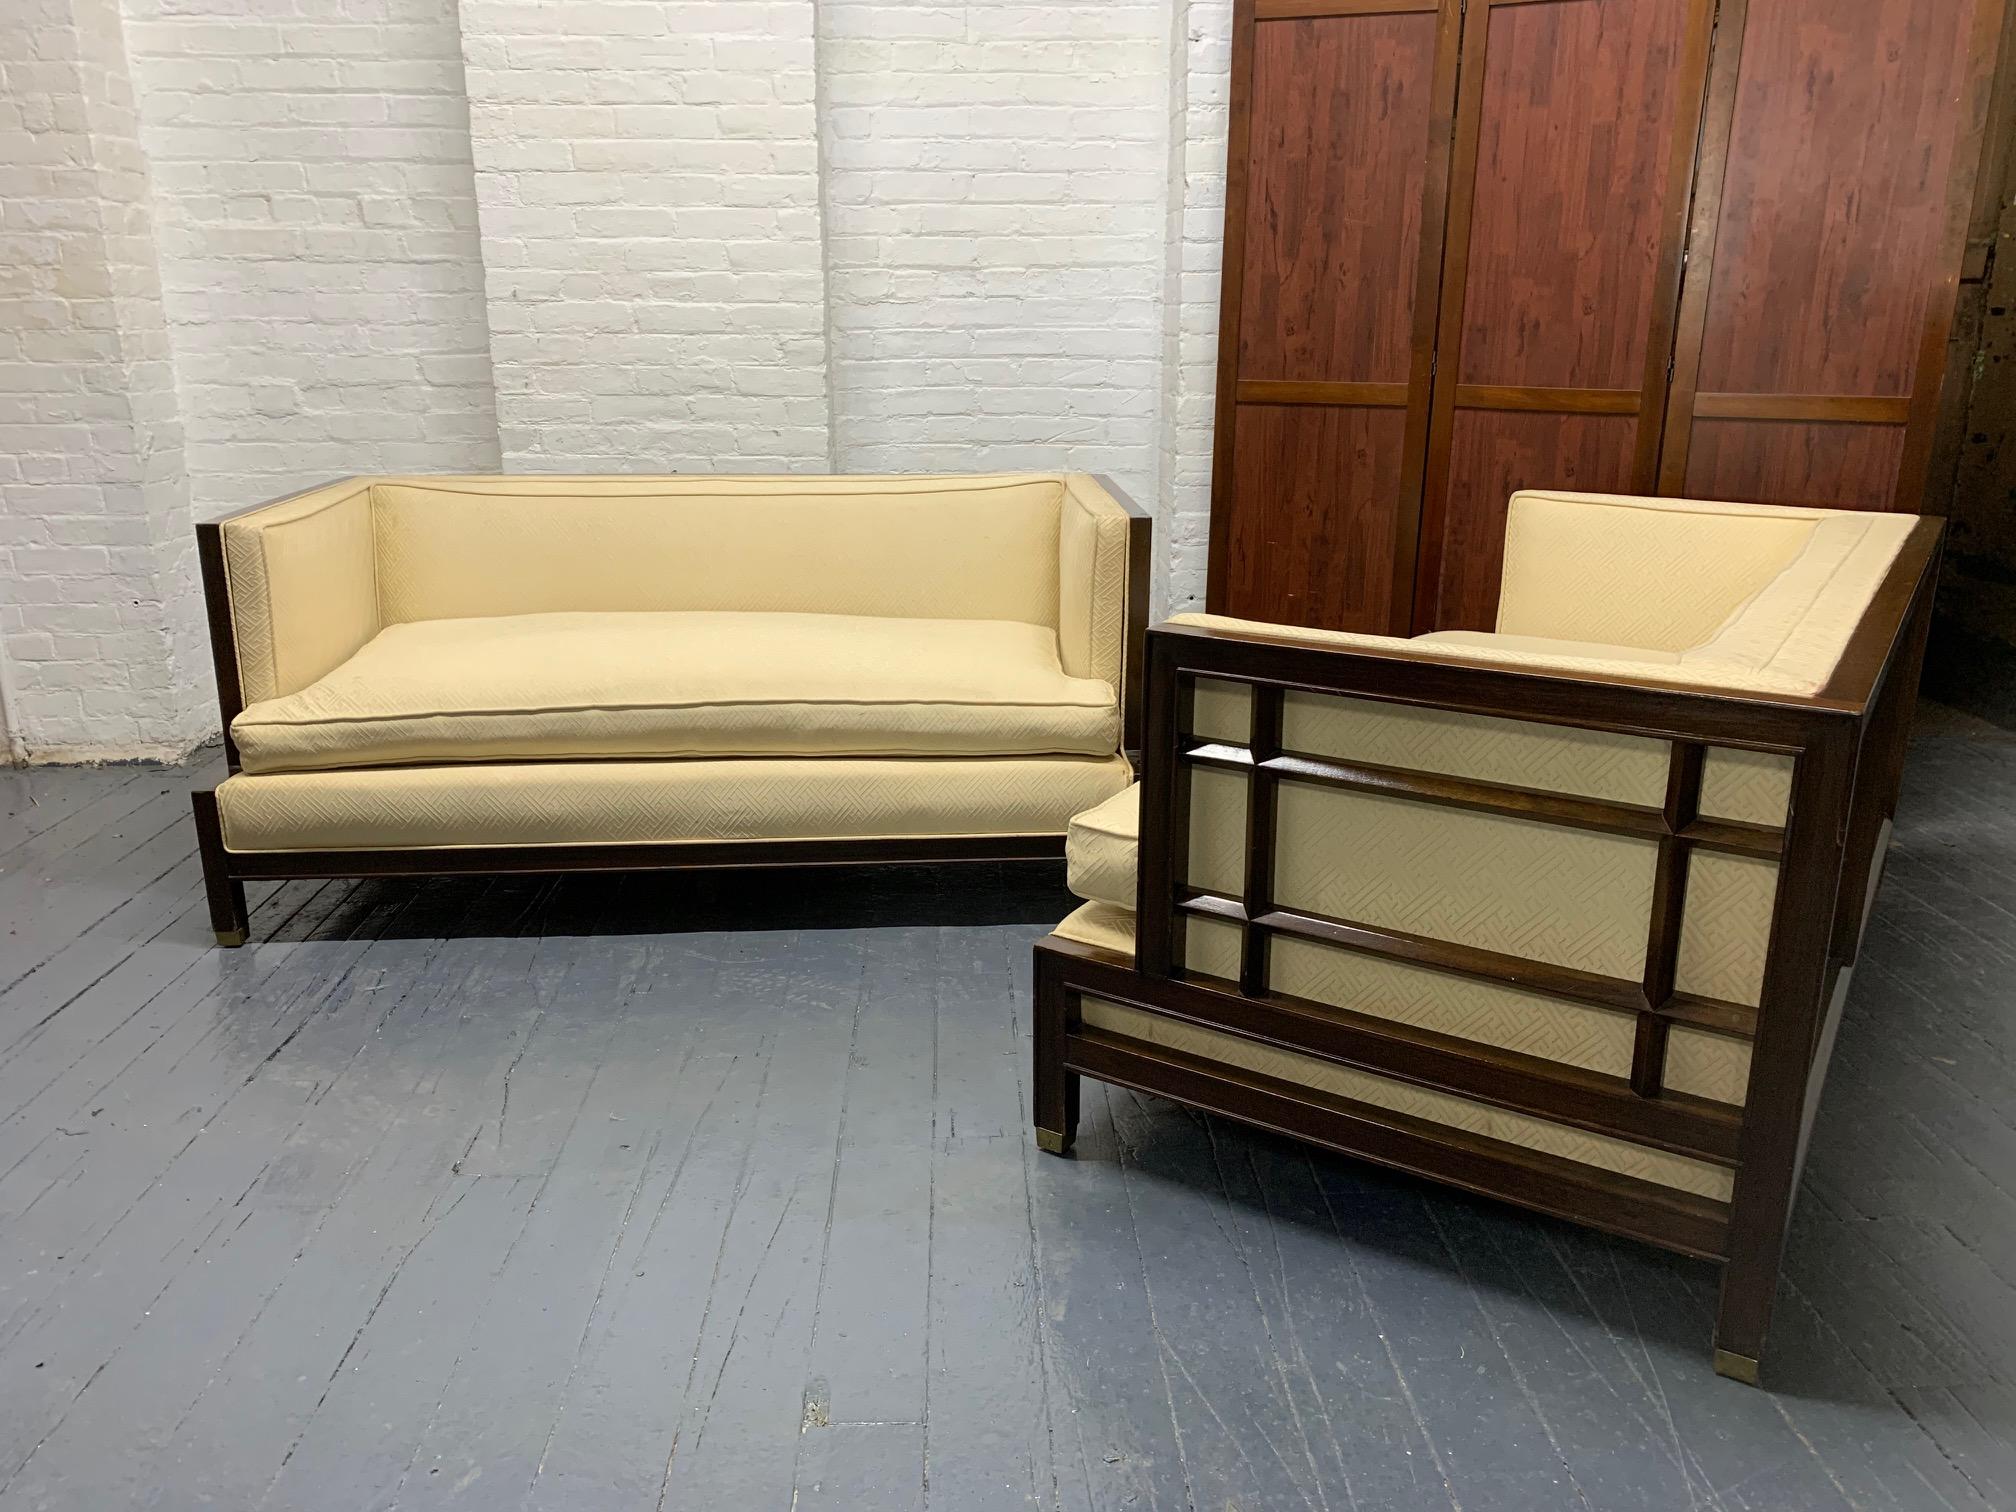 Pair of walnut James Mont sofas. The frame of the sofas is walnut, has lattice sides with a loose cushion seat.